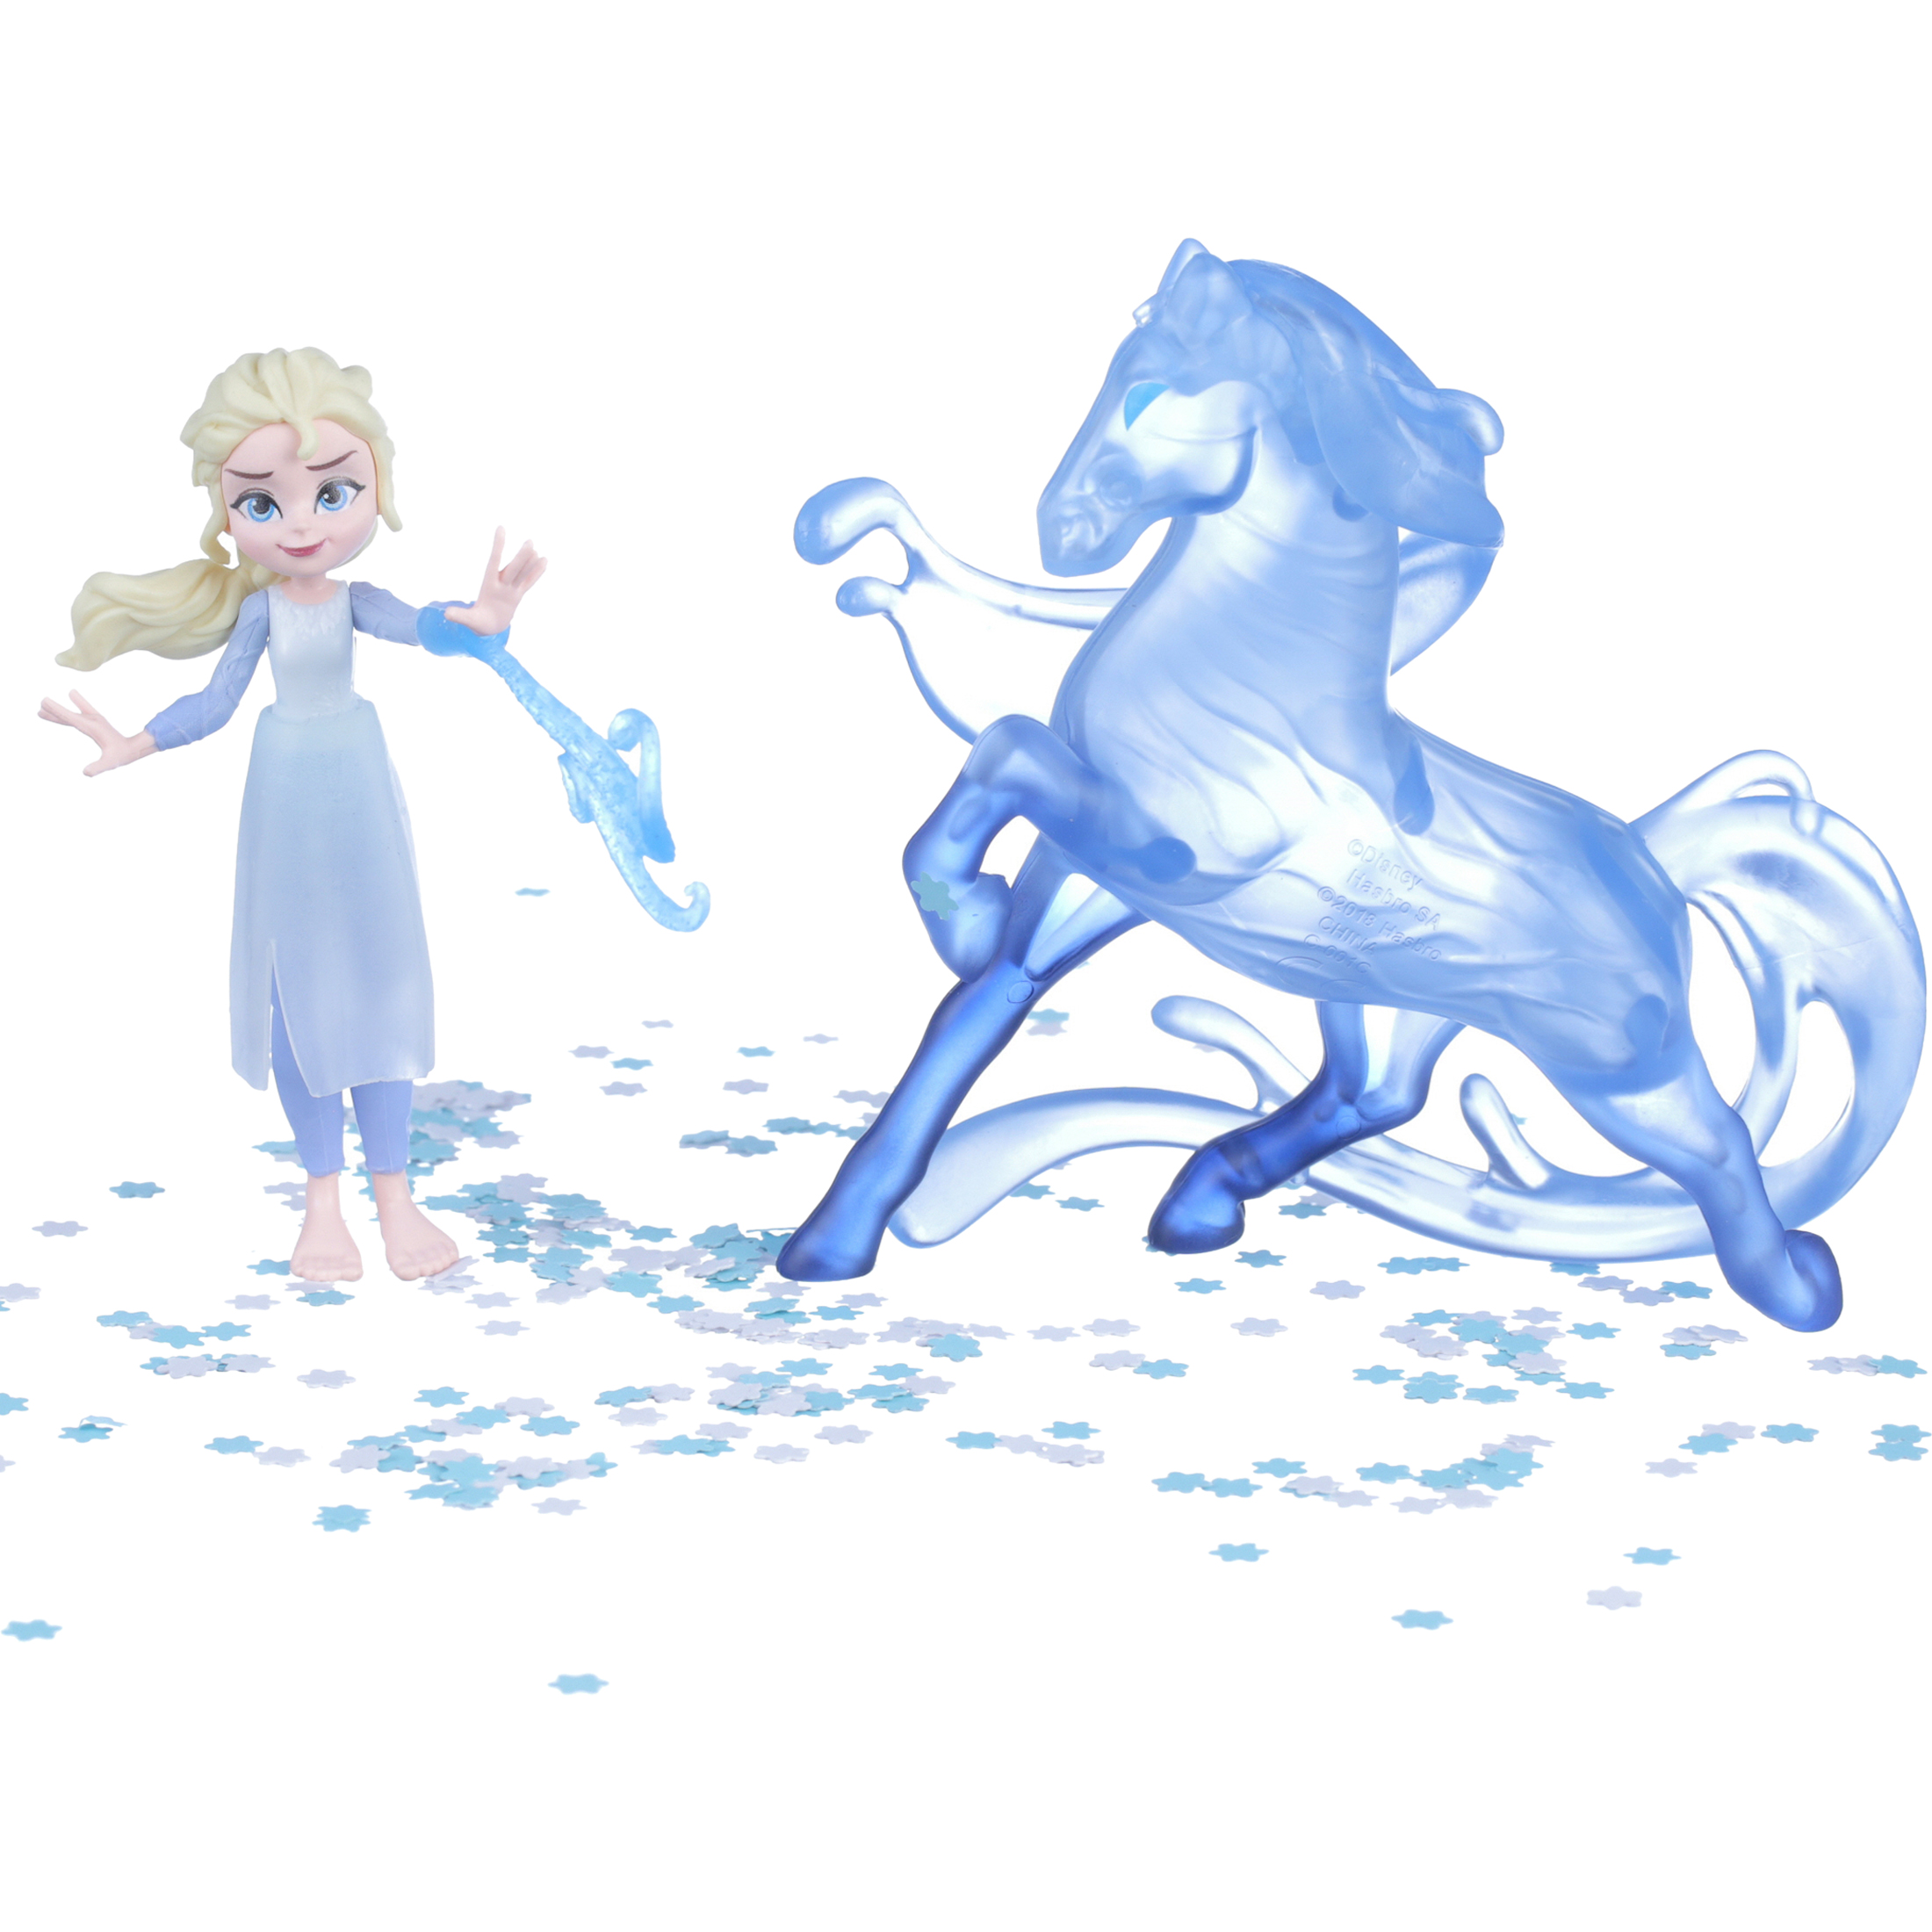 Disney Frozen 2 Elsa and the Nokk Small Doll Playset, Includes Doll and Nokk Figure - image 8 of 8